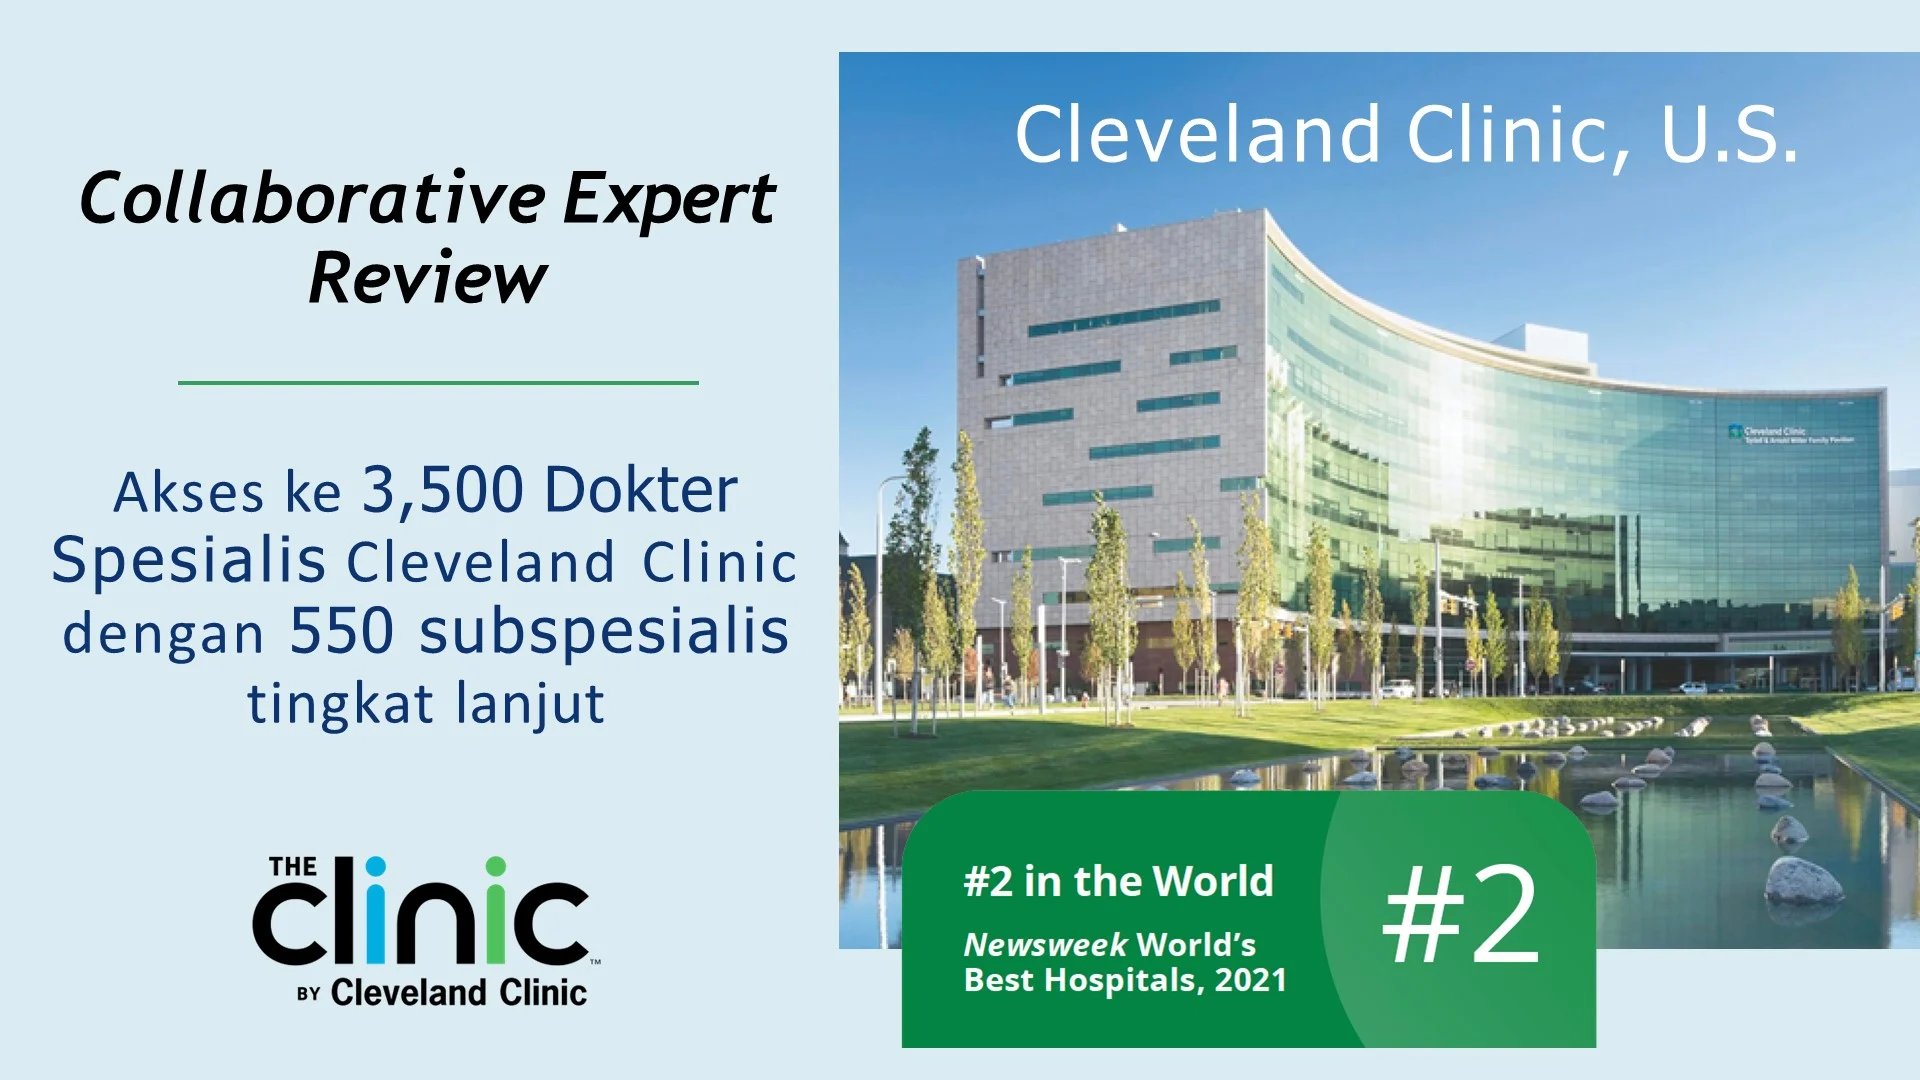 cleveland clinic-1